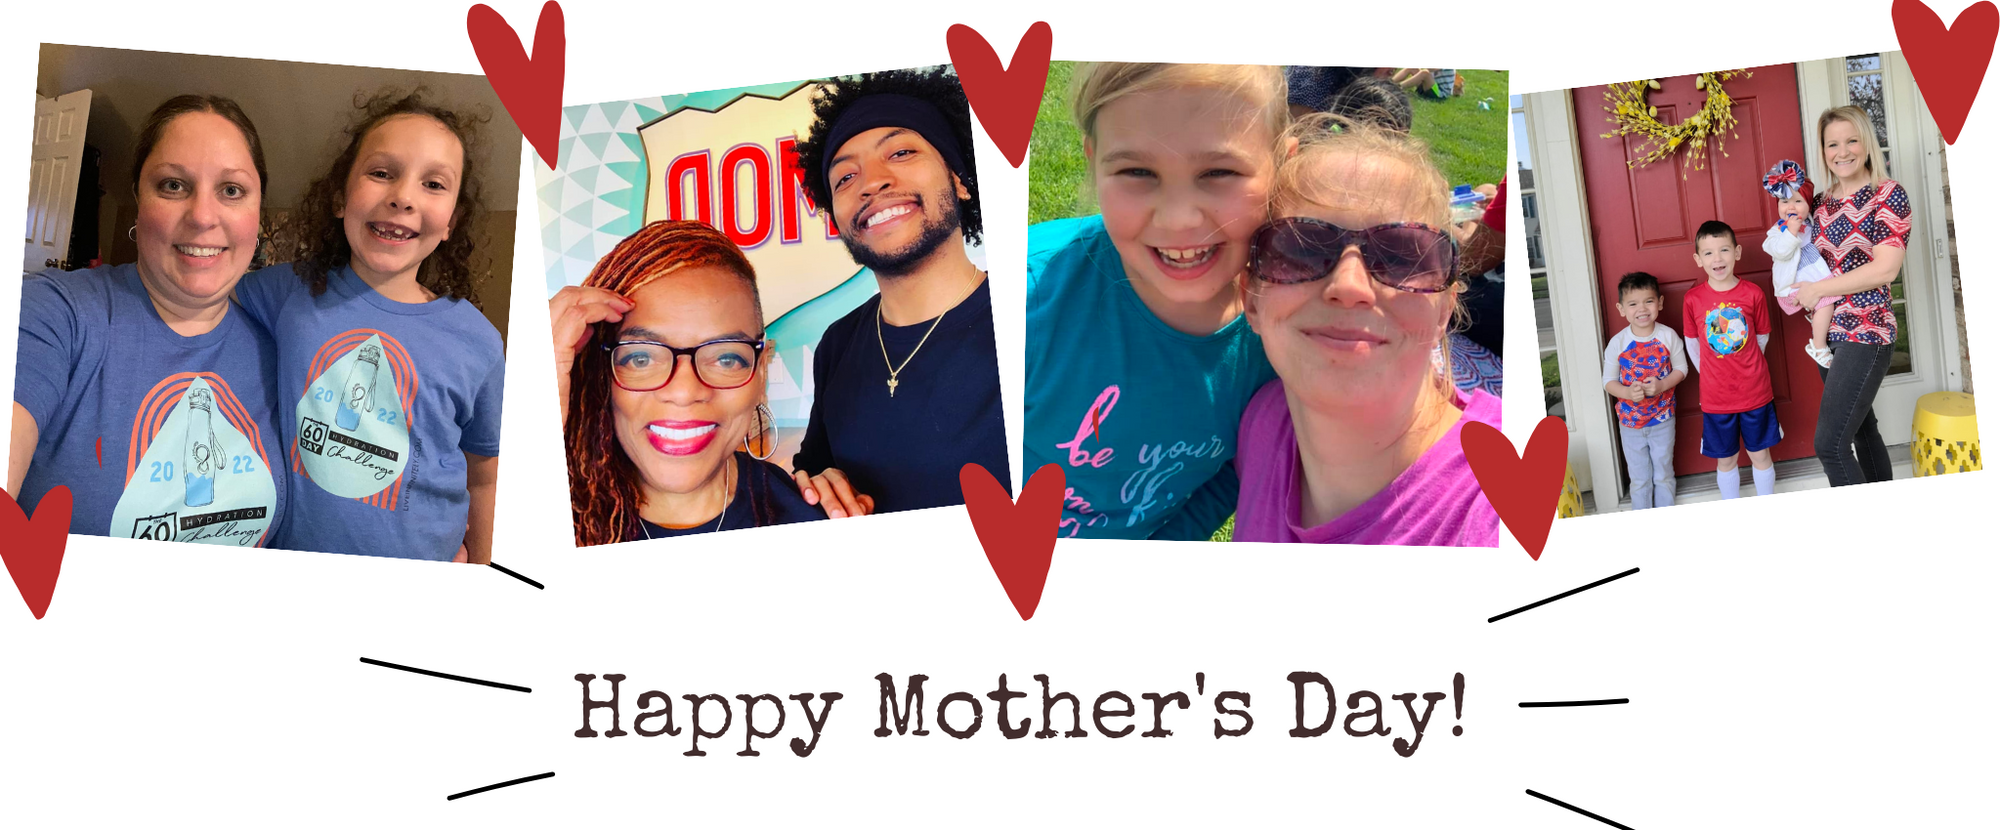 10 of Our Favorite Mother's Day Quotes